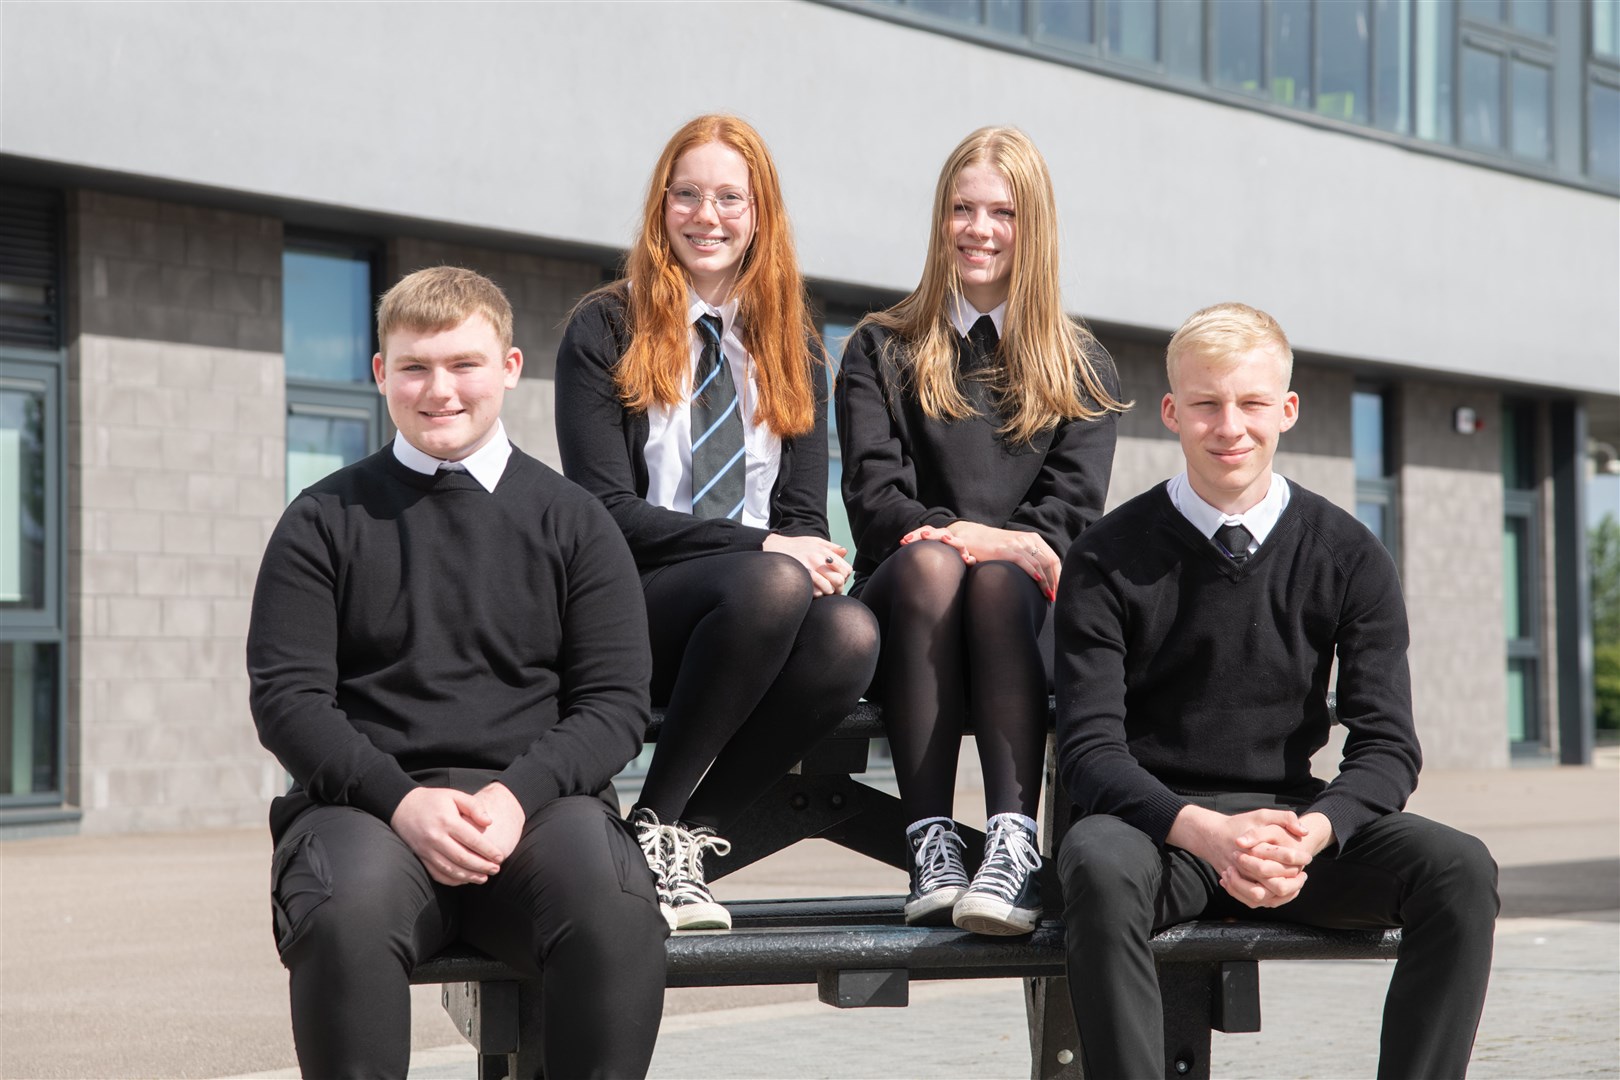 From left to right: Kenzie Stephen, Darcey Taylor, Kathryn Petrie and Zack Crowley. Picture: Daniel Forsyth